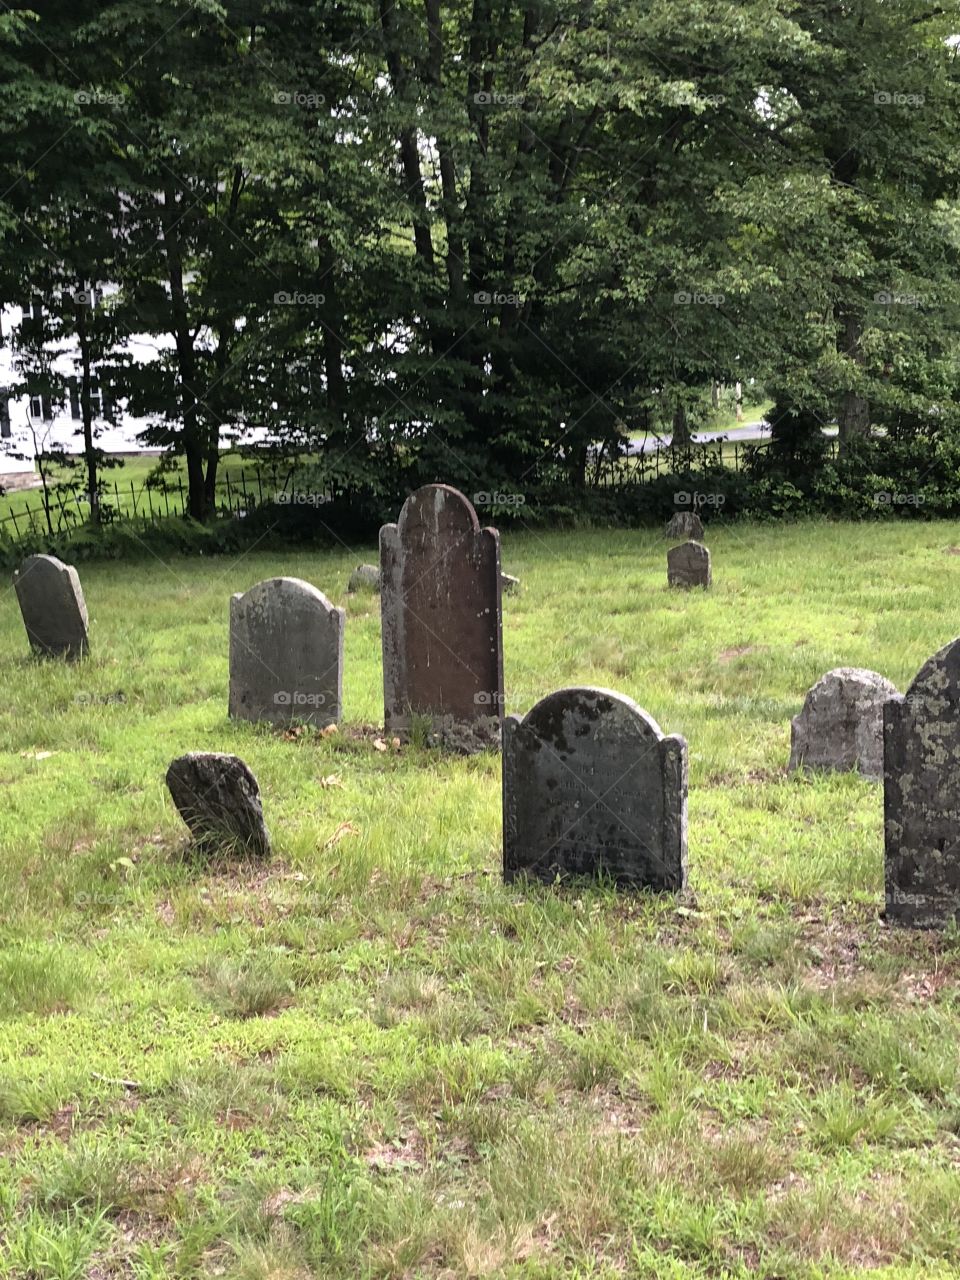 Union Cemetery in Easton, CT known to be haunted photo taken June 2018